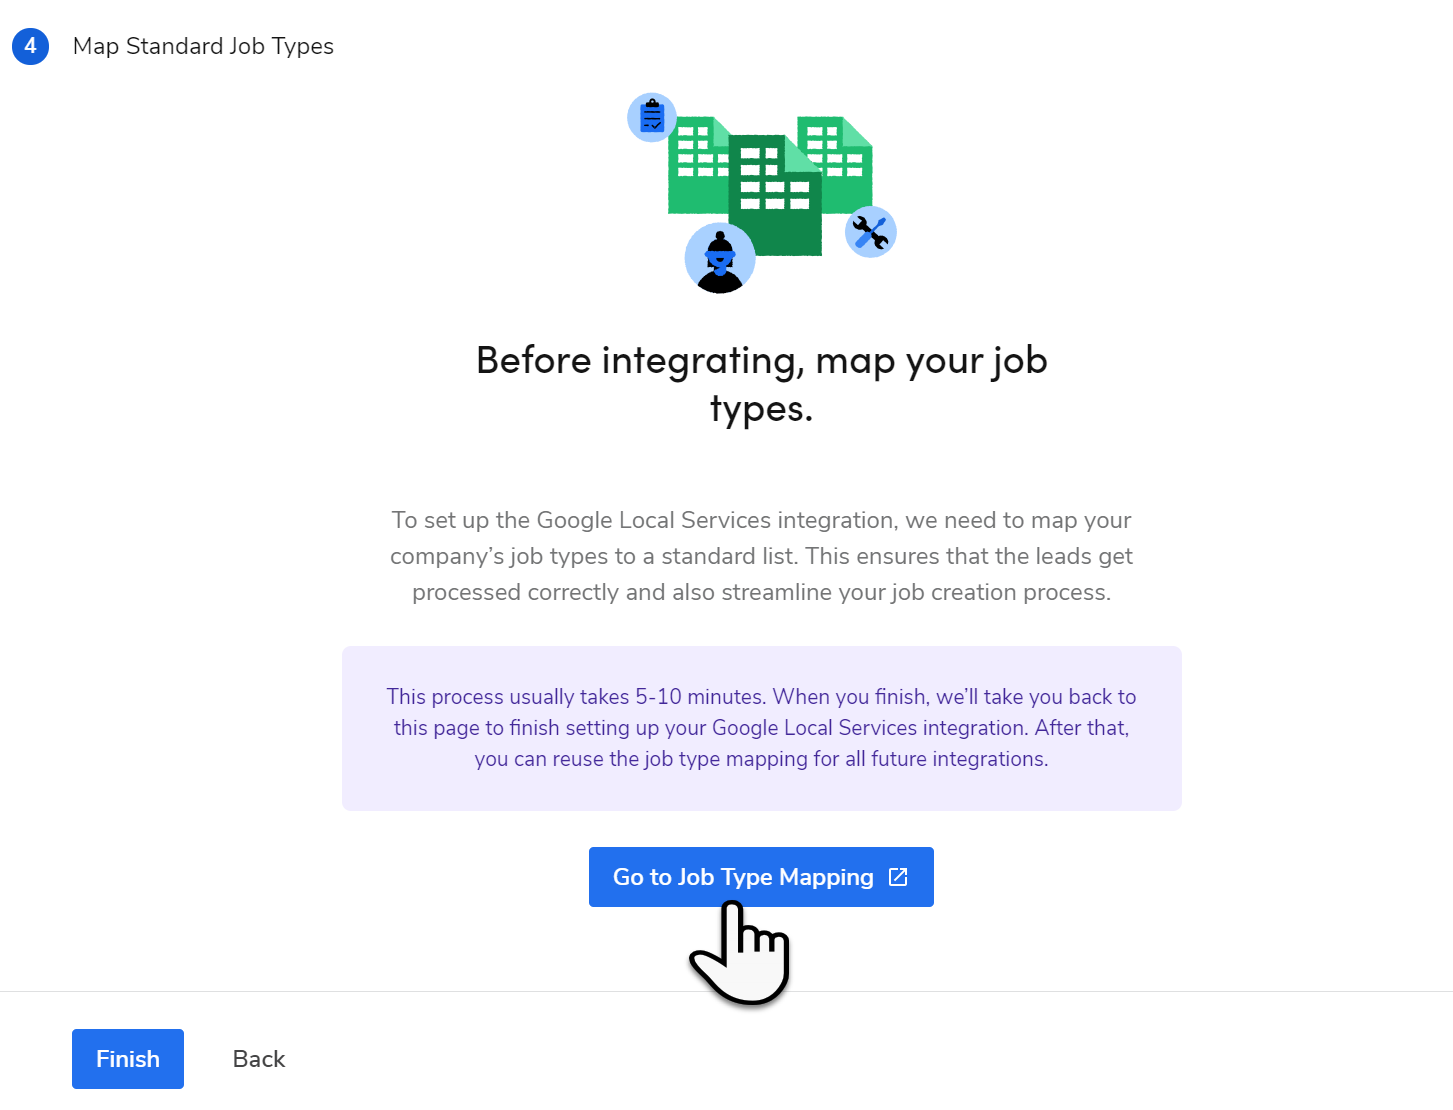 Go to Job Type Mapping.png